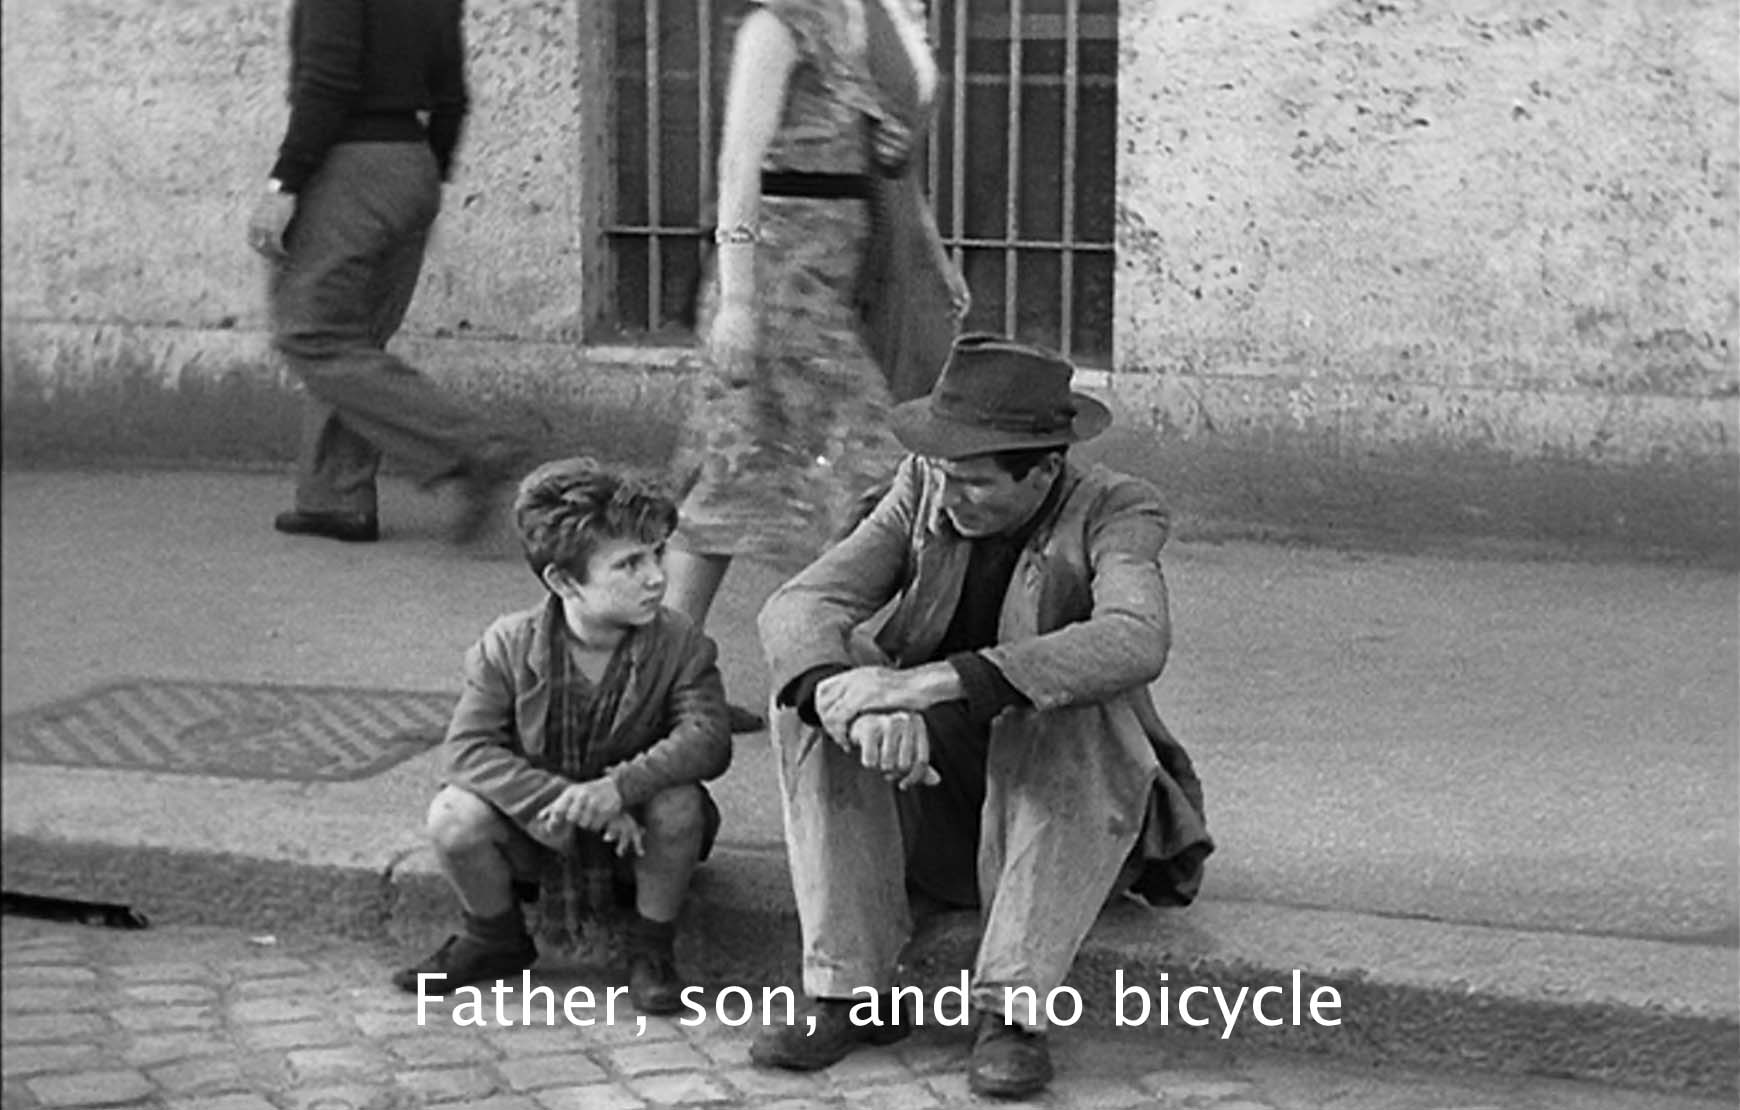 Father, son, and no bicycle